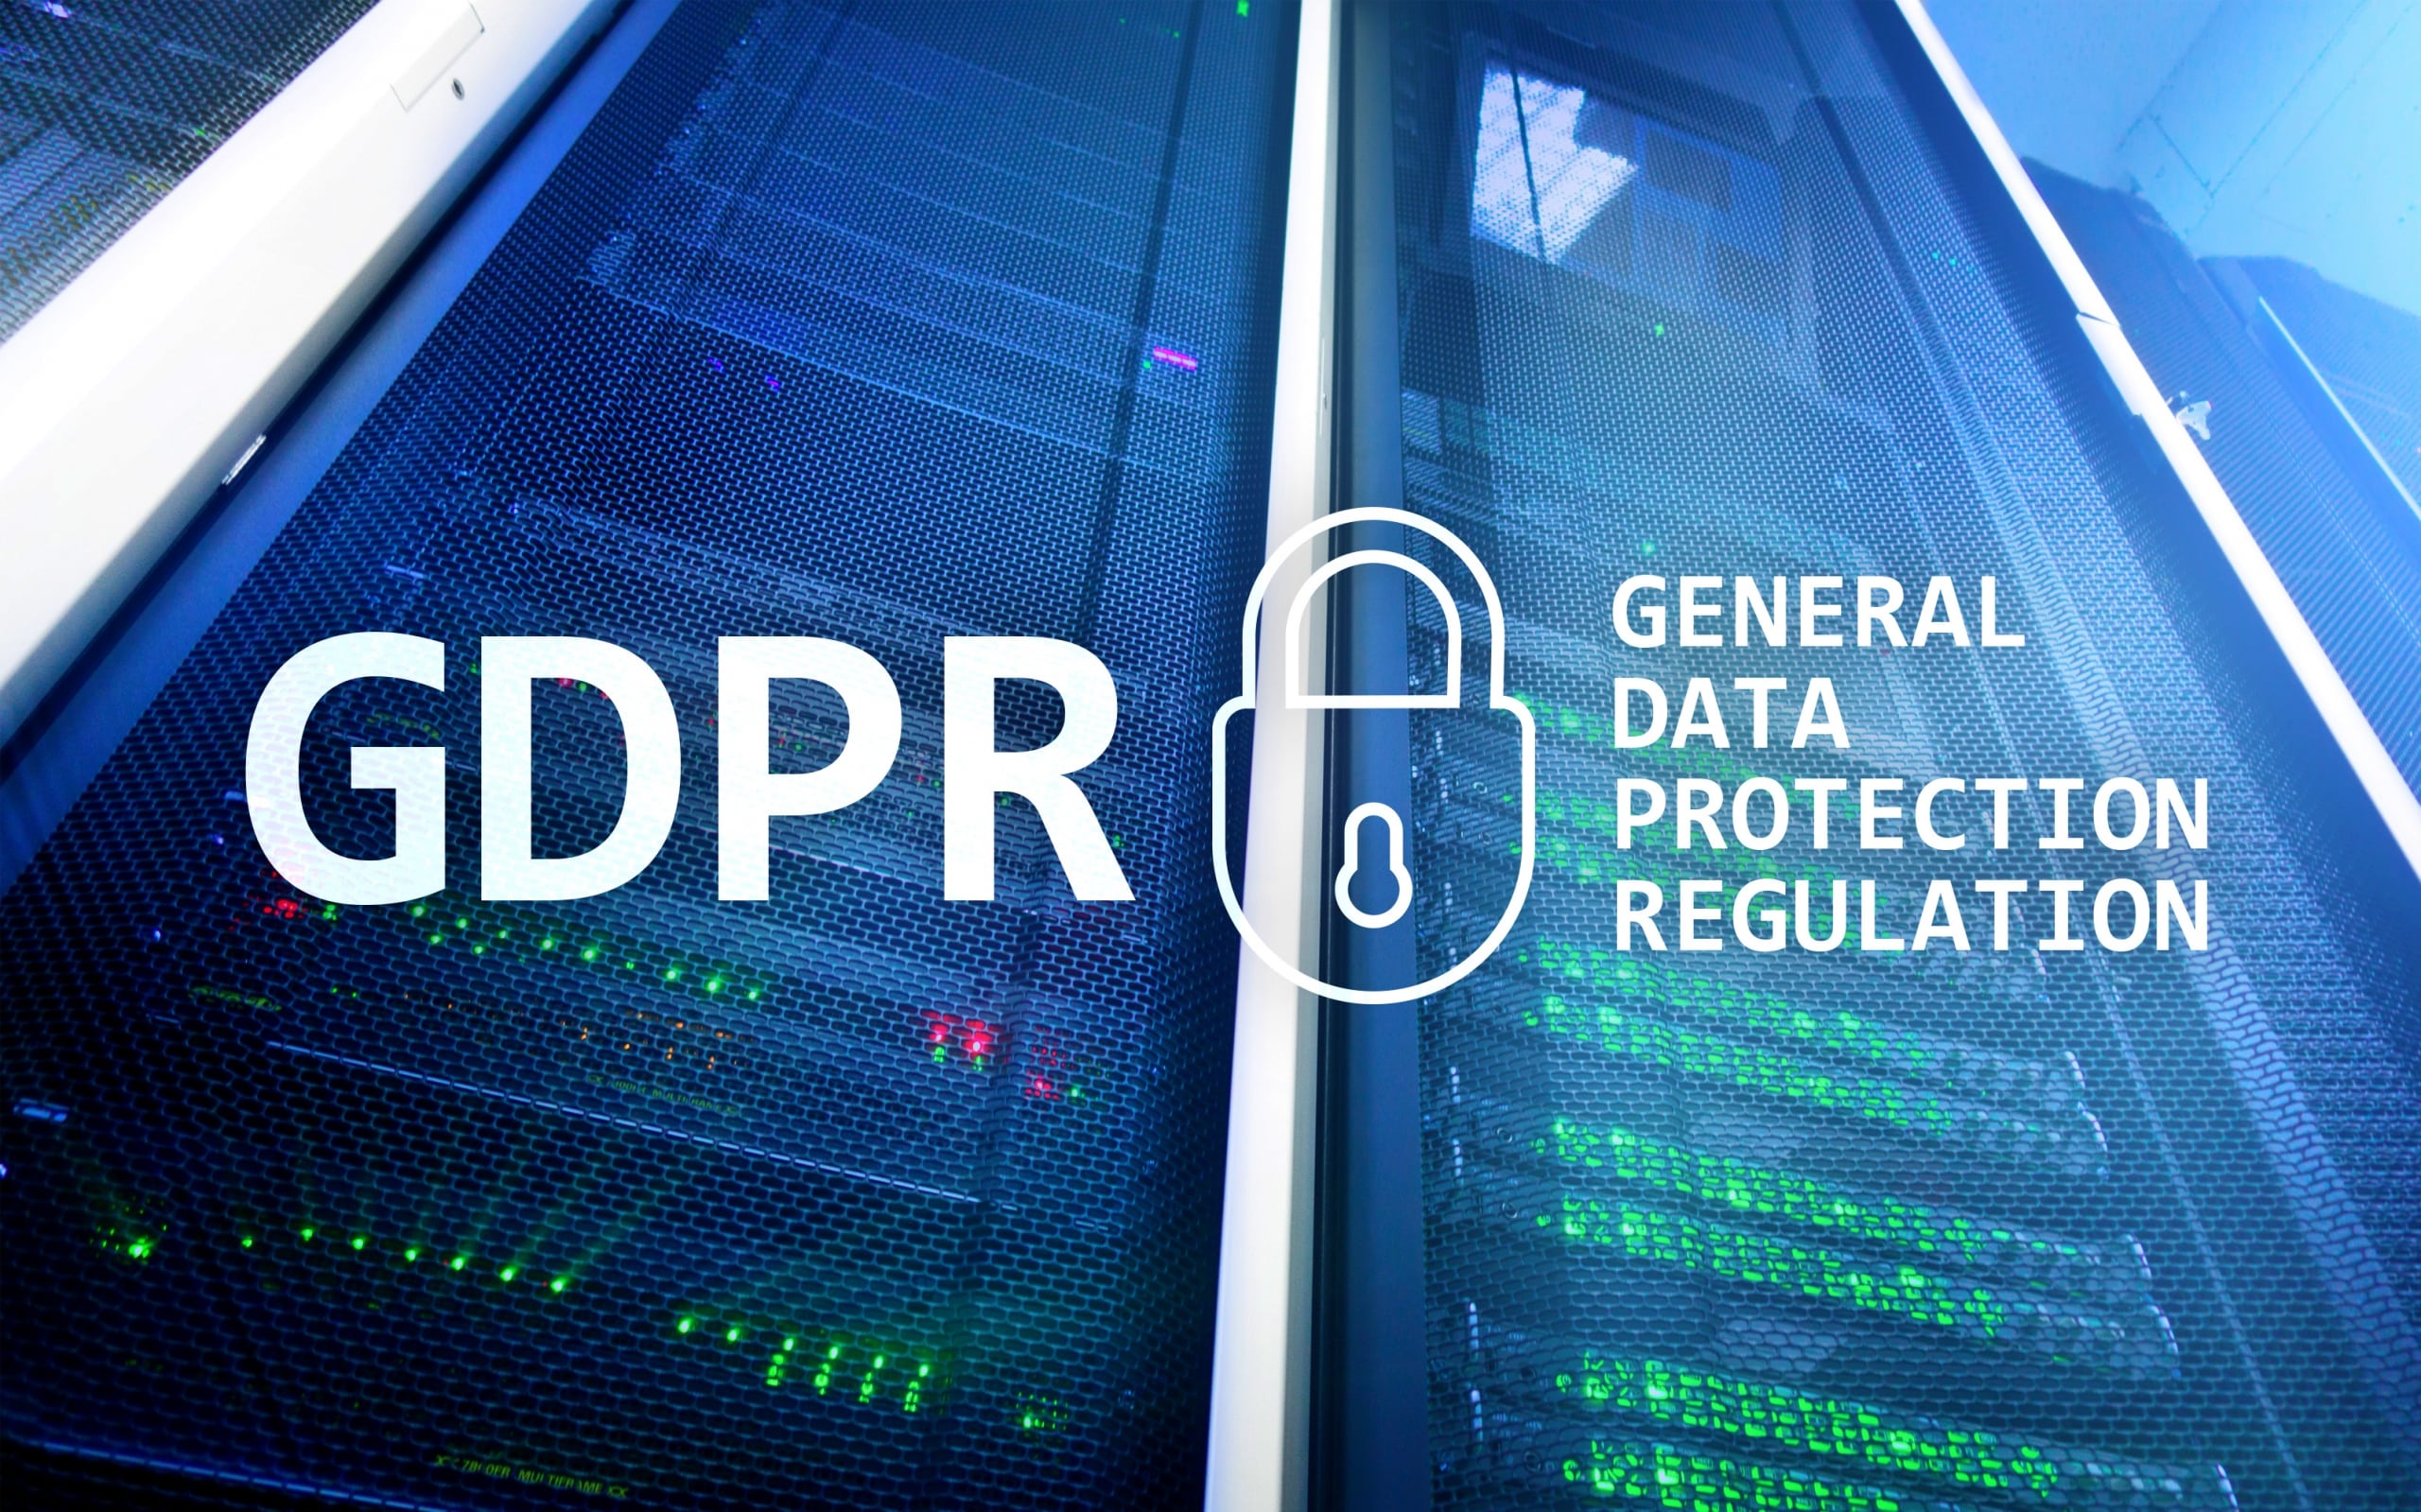 How to Meet GDPR Article 30 Requirements in 2020